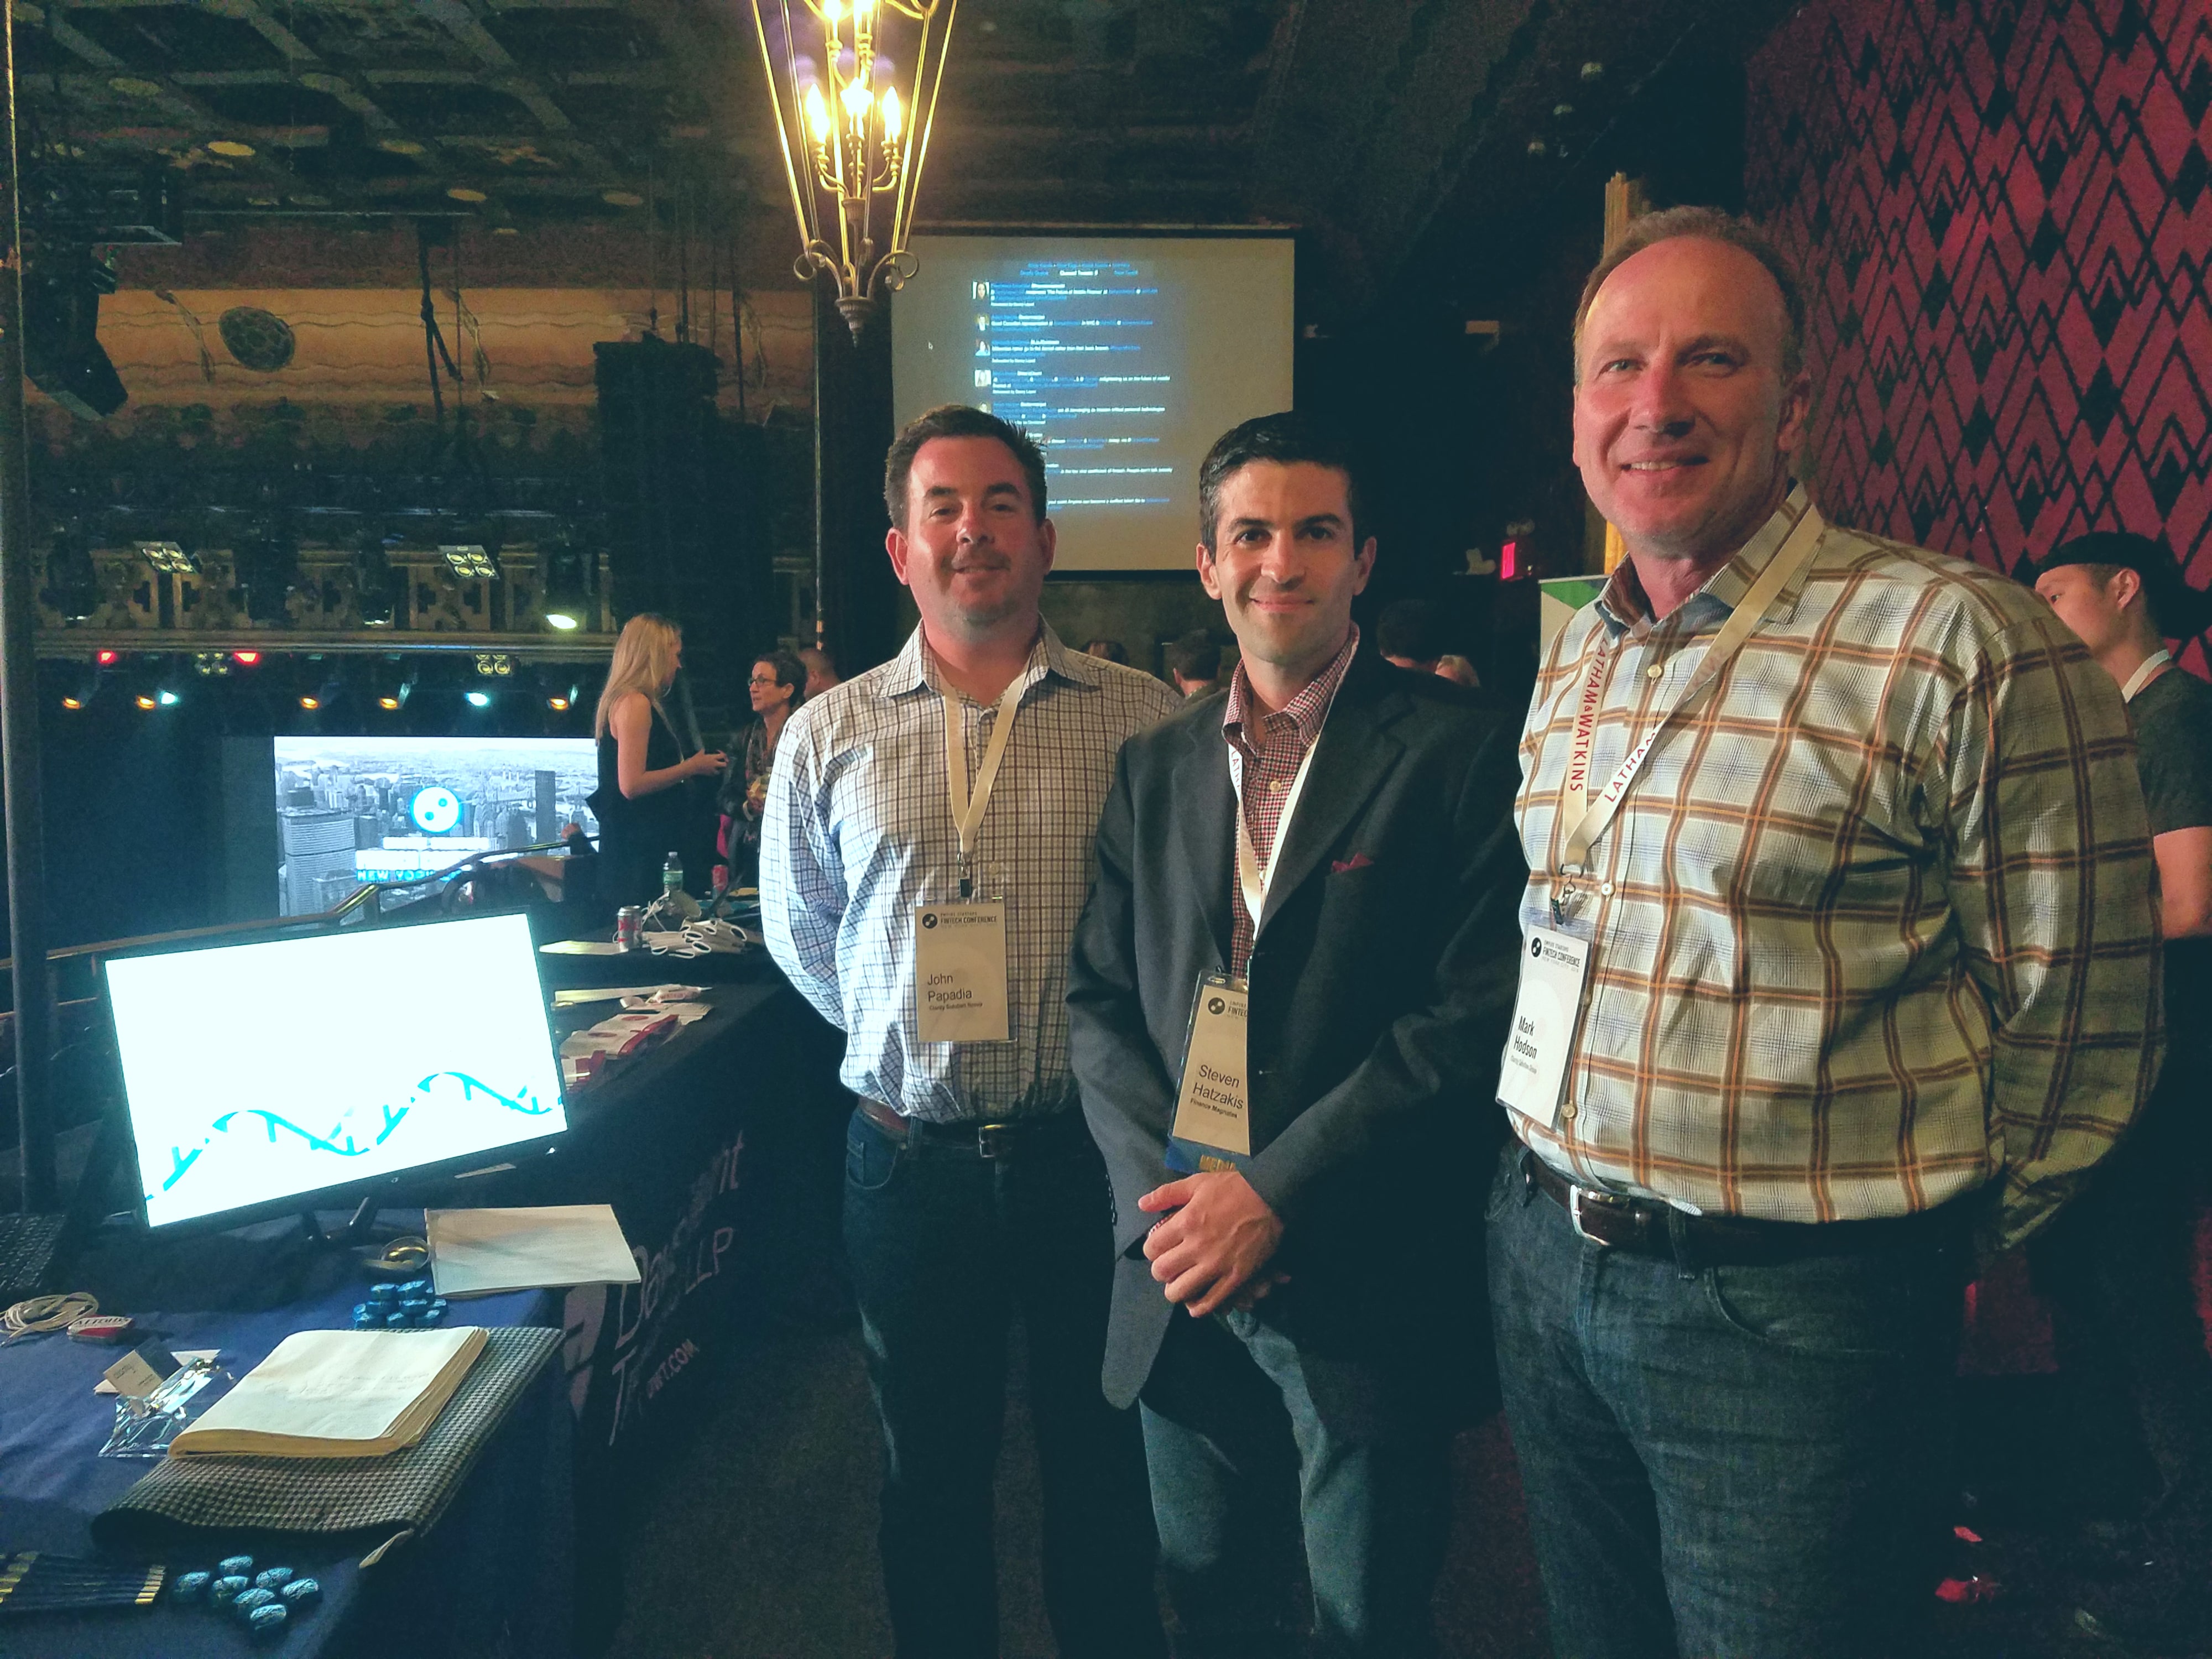 Finance Magnates' Editor Steven Hatzakis (middle) meets with John Papadia (left), President and Founder of Clarity Solutions Group, and Mark Hodson (right), Vice President of Clarity Solutions Group at the company's exhibitor booth at the Empire Startups Fintech NY conference April 28, 2016.